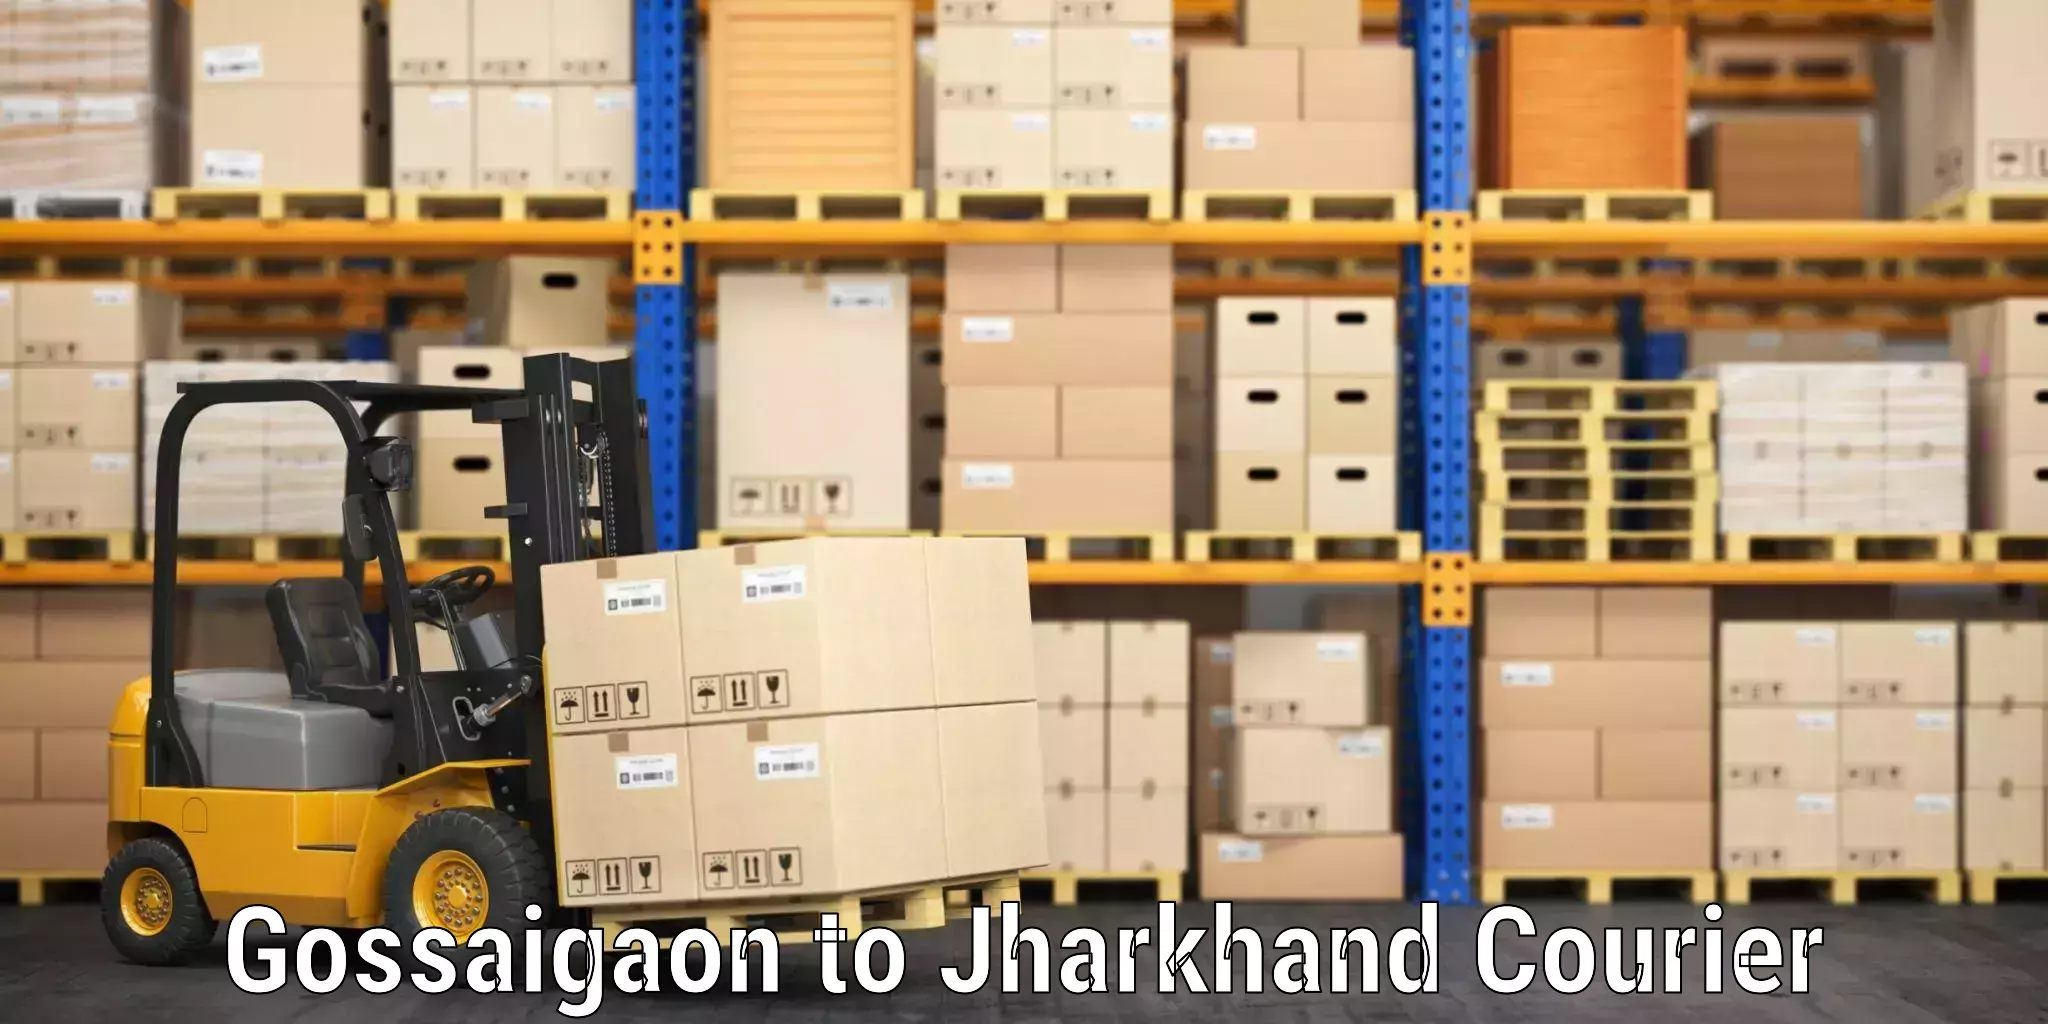 Instant baggage transport quote Gossaigaon to Jharkhand